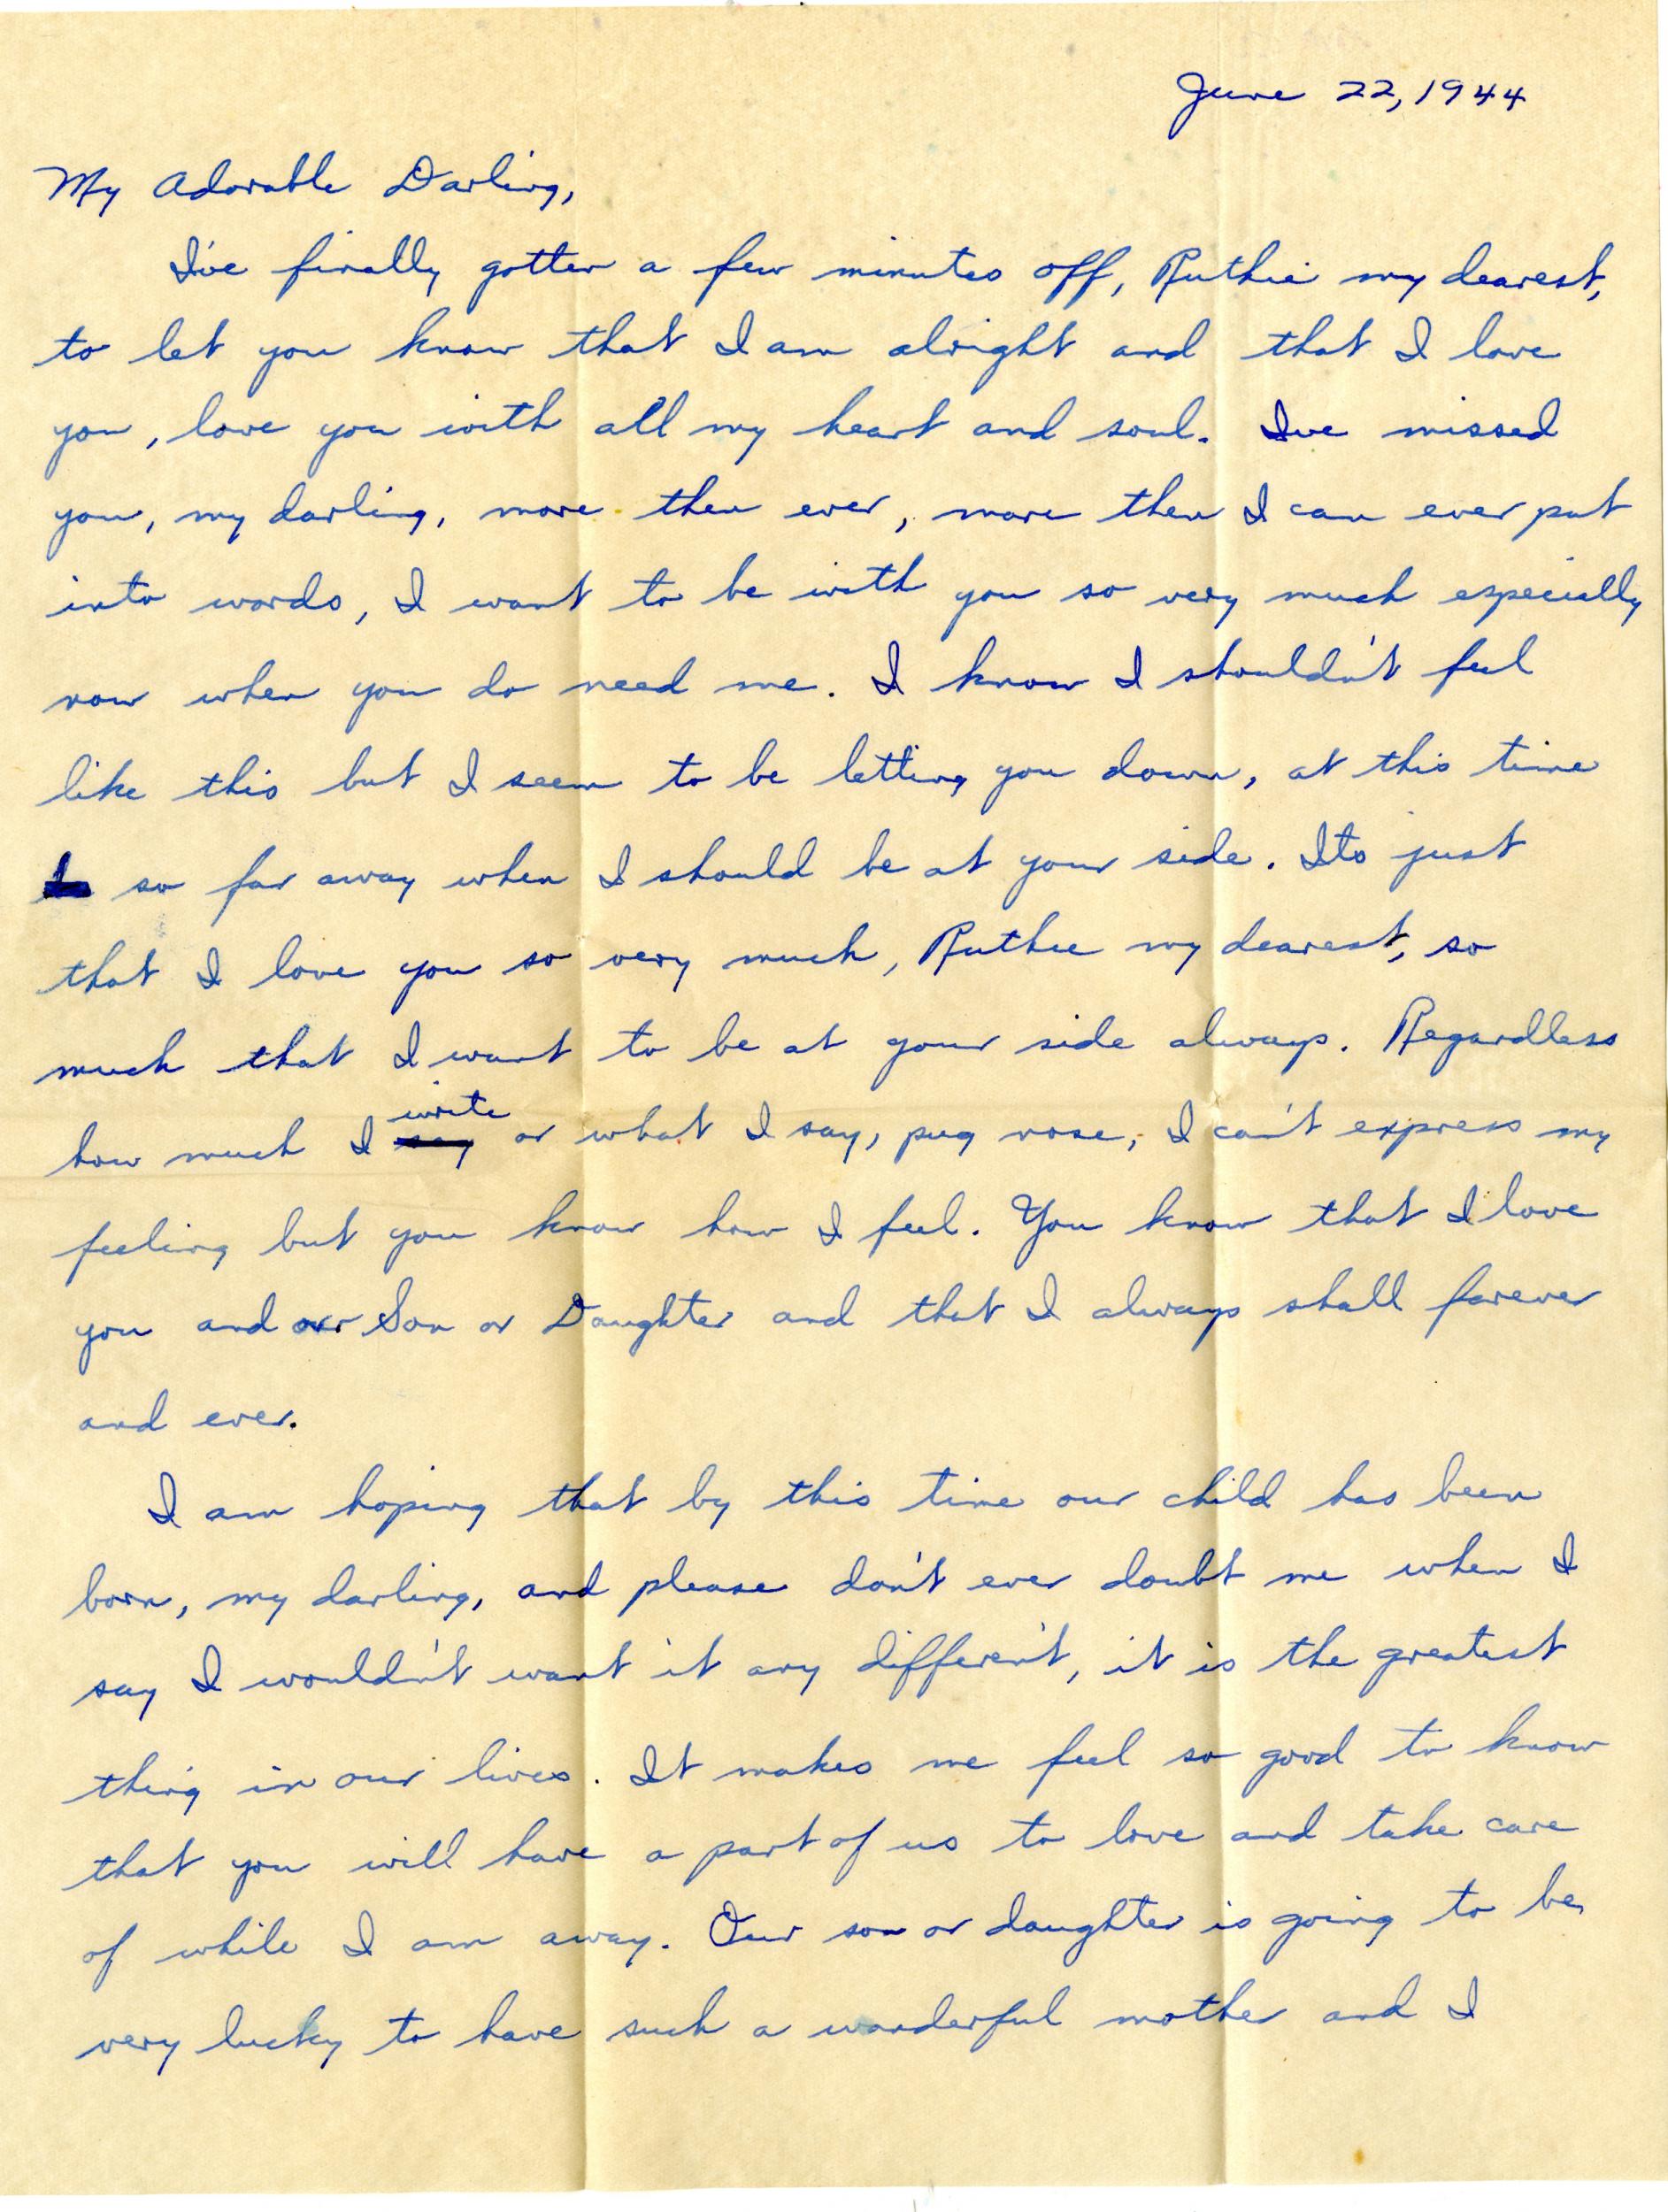 A letter from Bill Svrluga Sr to his wife from 1944. It begins: ‘I’ve finally gotten a few minutes off, Ruthie my dearest, to let you know that I am alright and that I love you, love you with all my heart and soul’